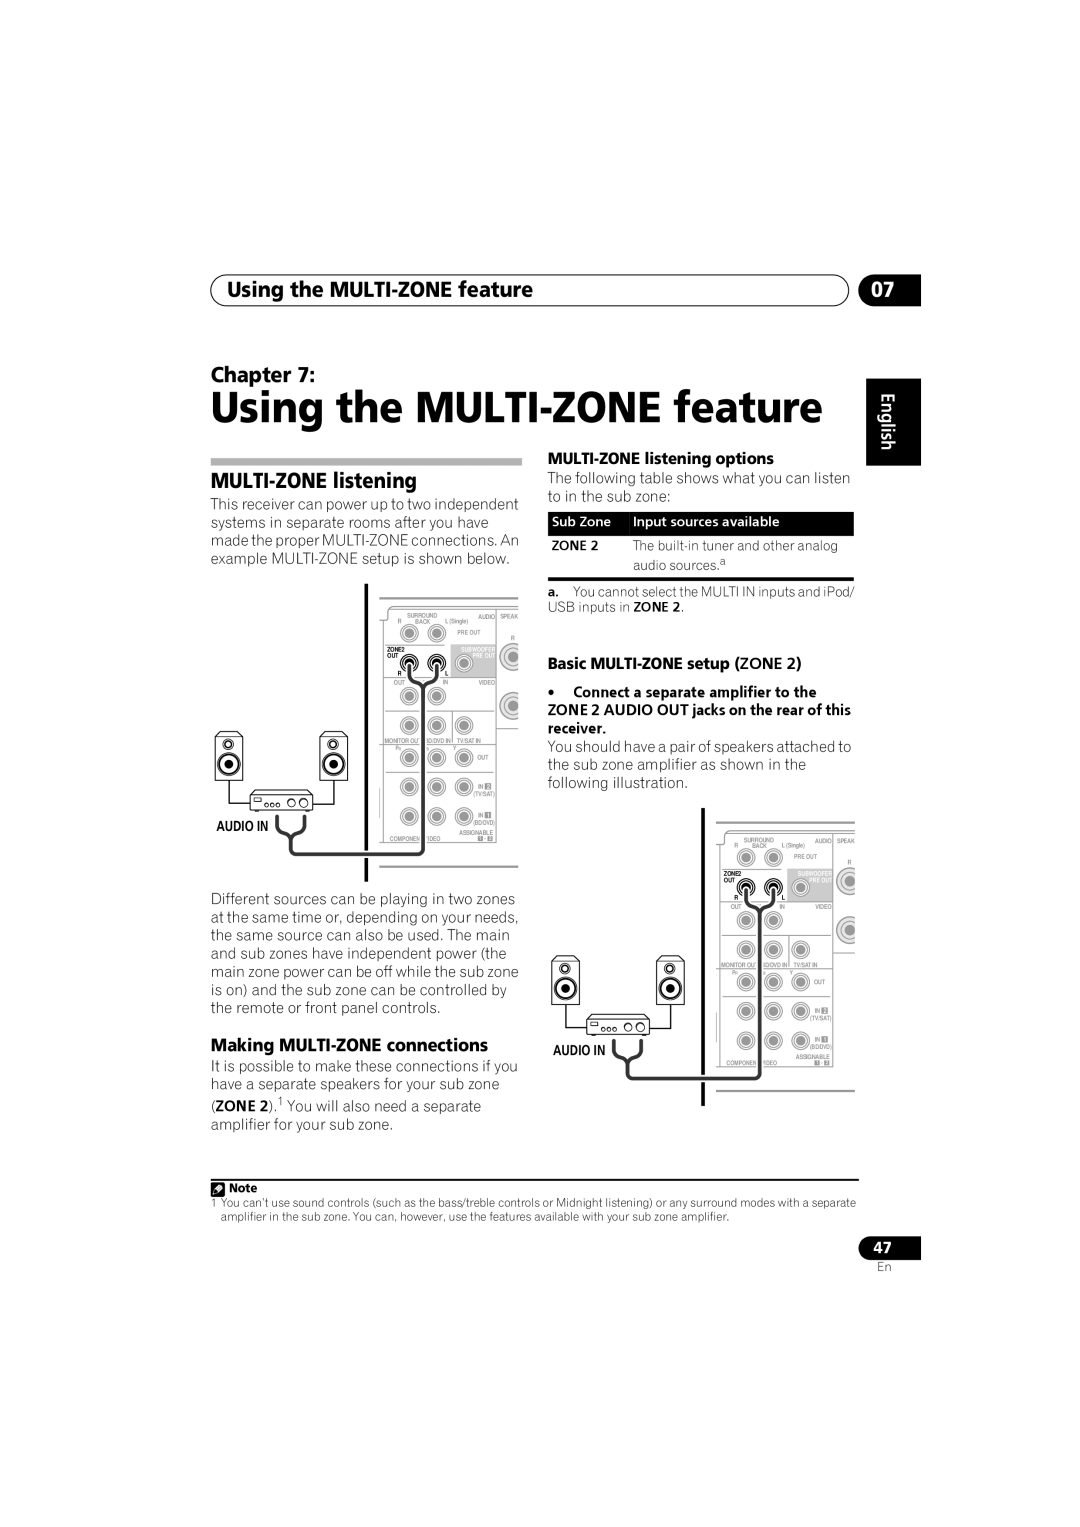 Pioneer VSX-819H-S Using the MULTI-ZONEfeature Chapter, MULTI-ZONElistening, Making MULTI-ZONEconnections, English 